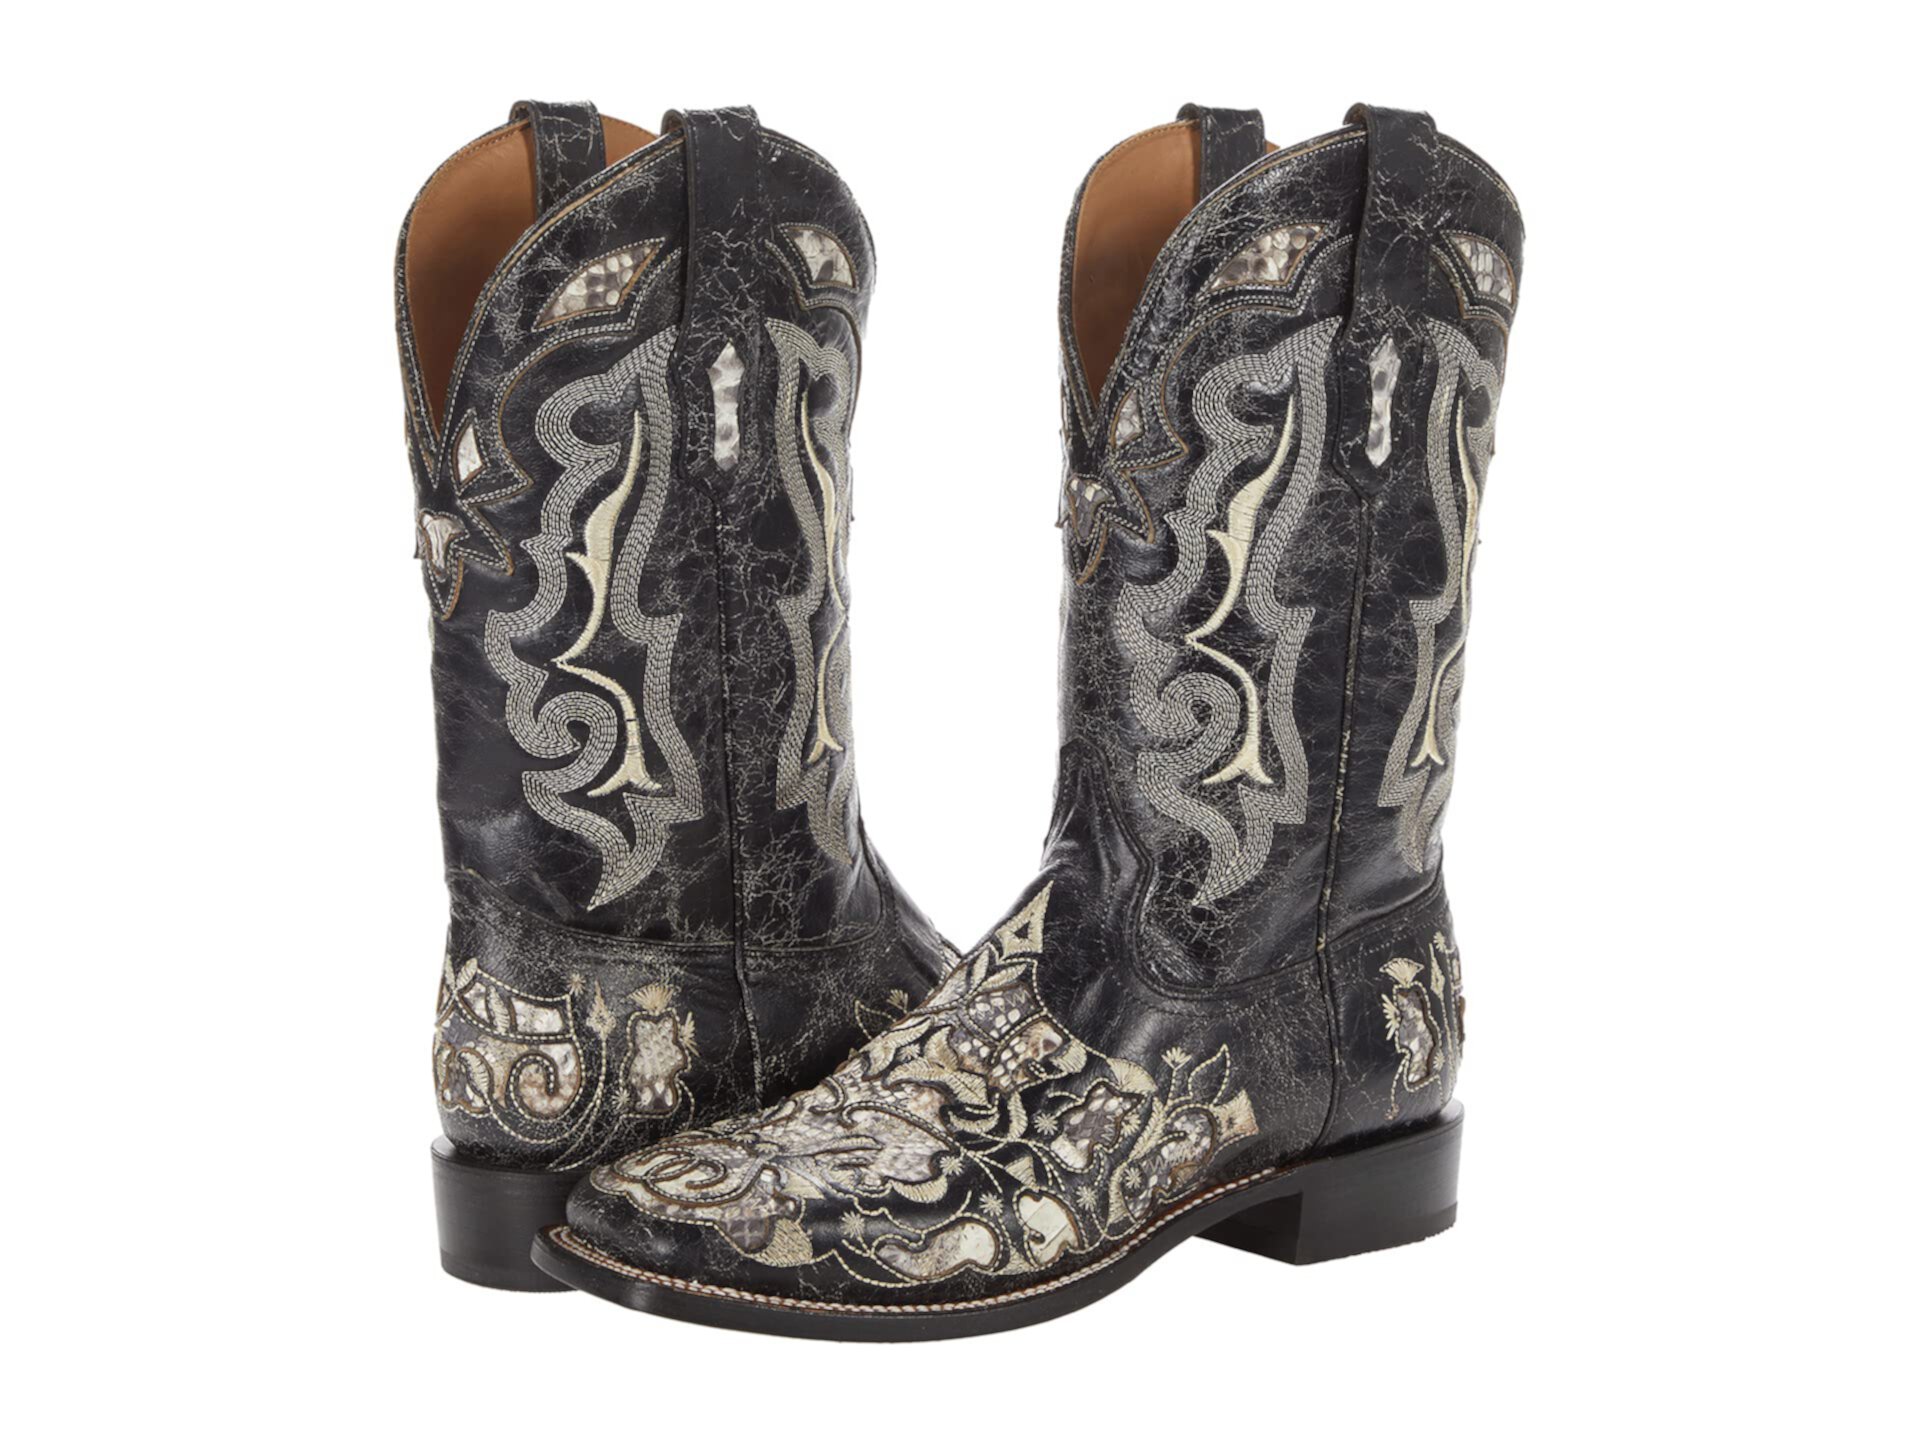 A4175 Corral Boots